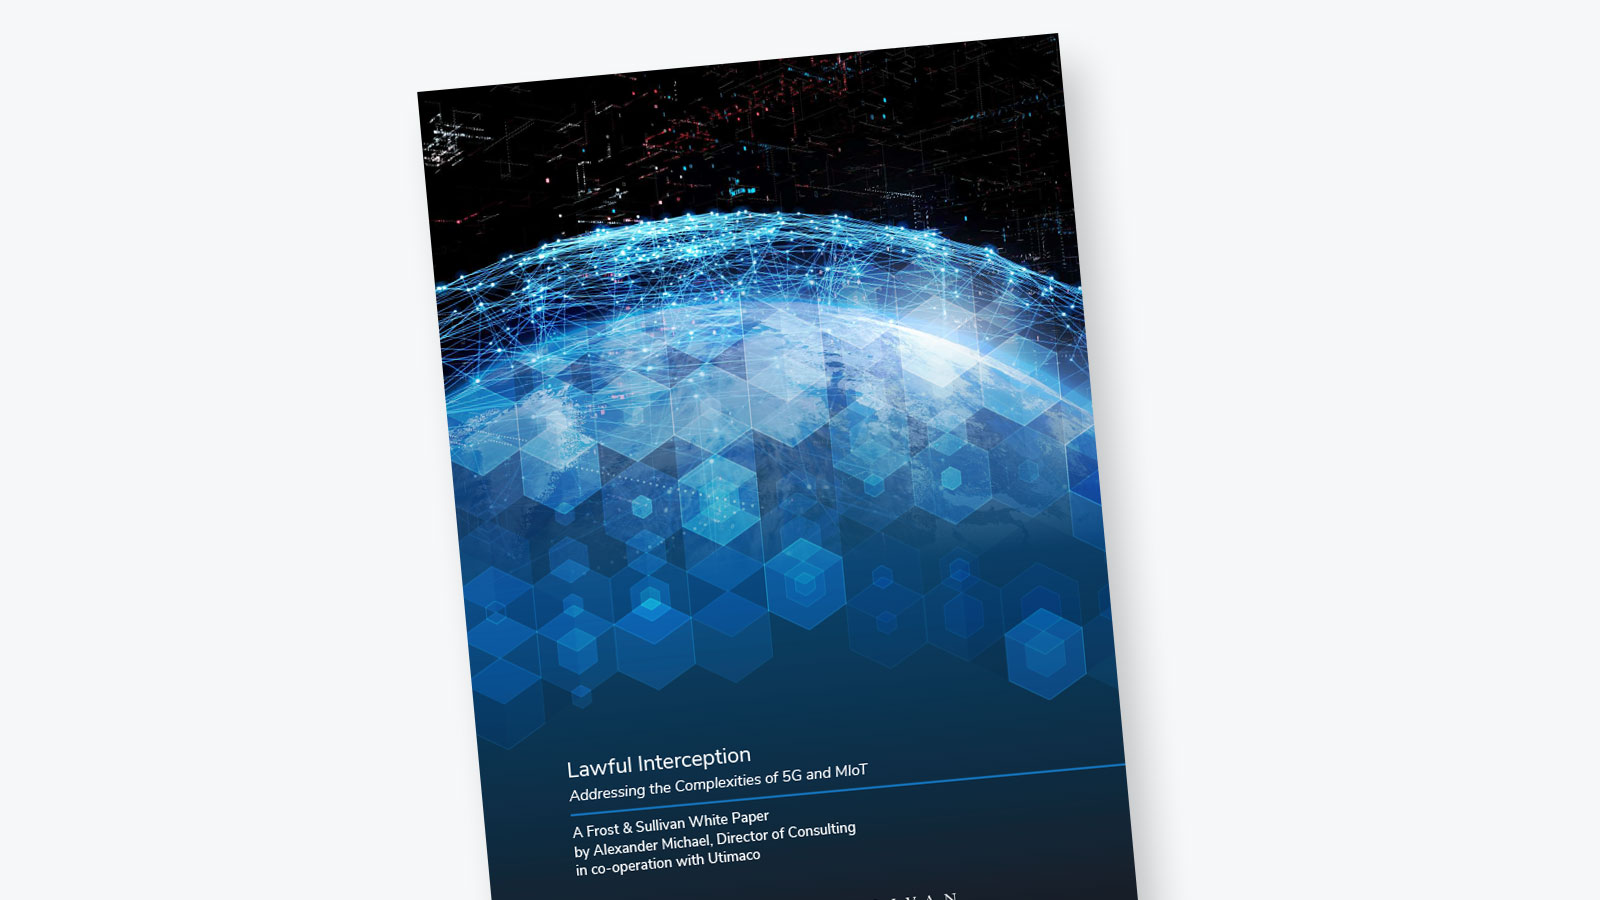 Whitepaper Lawful Interception Addressing the Complex of 5G and MIoT